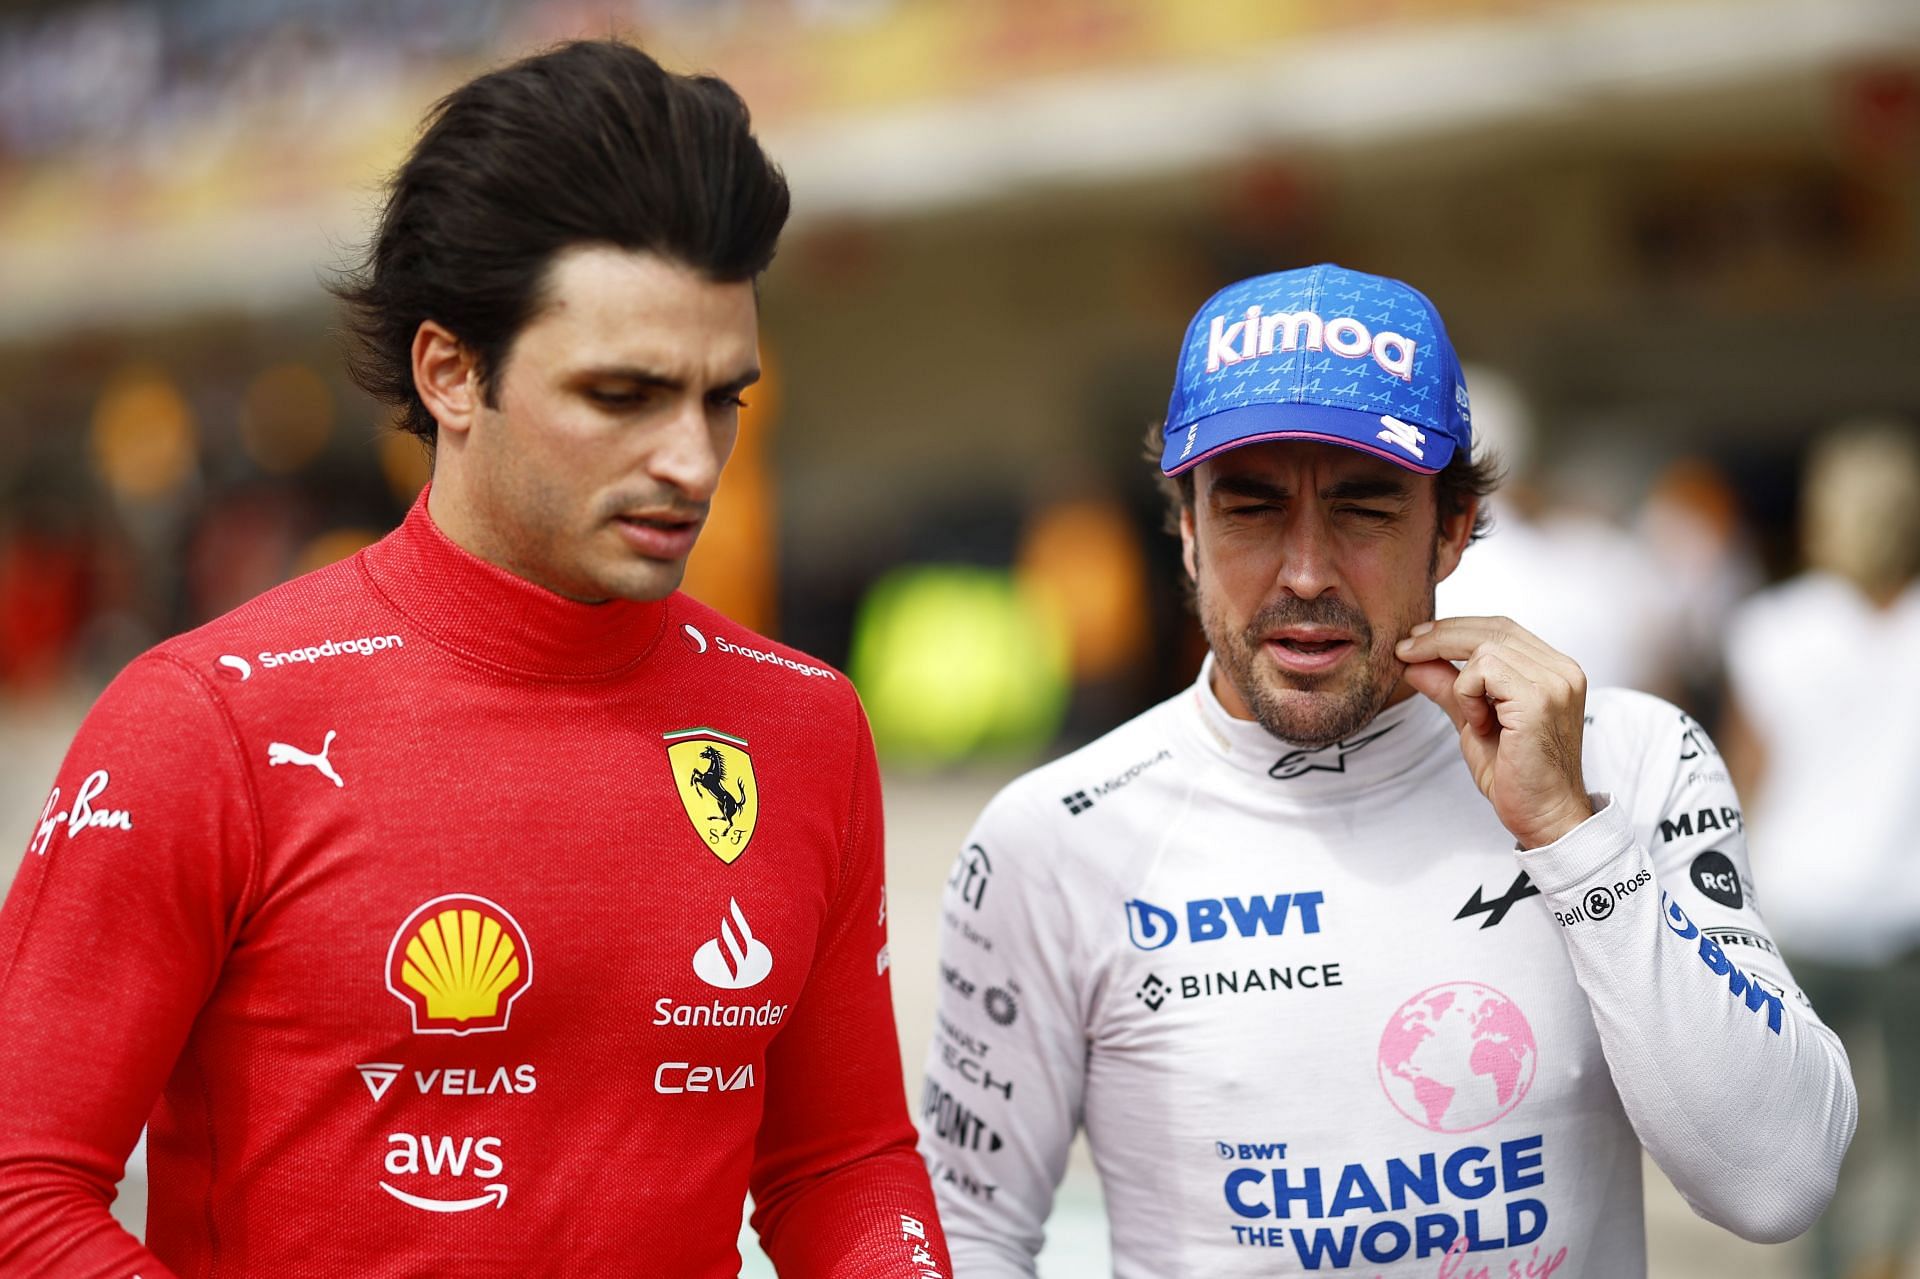 Carlos Sainz and Fernando Alonso have fallen out recently, according to F1  pundit